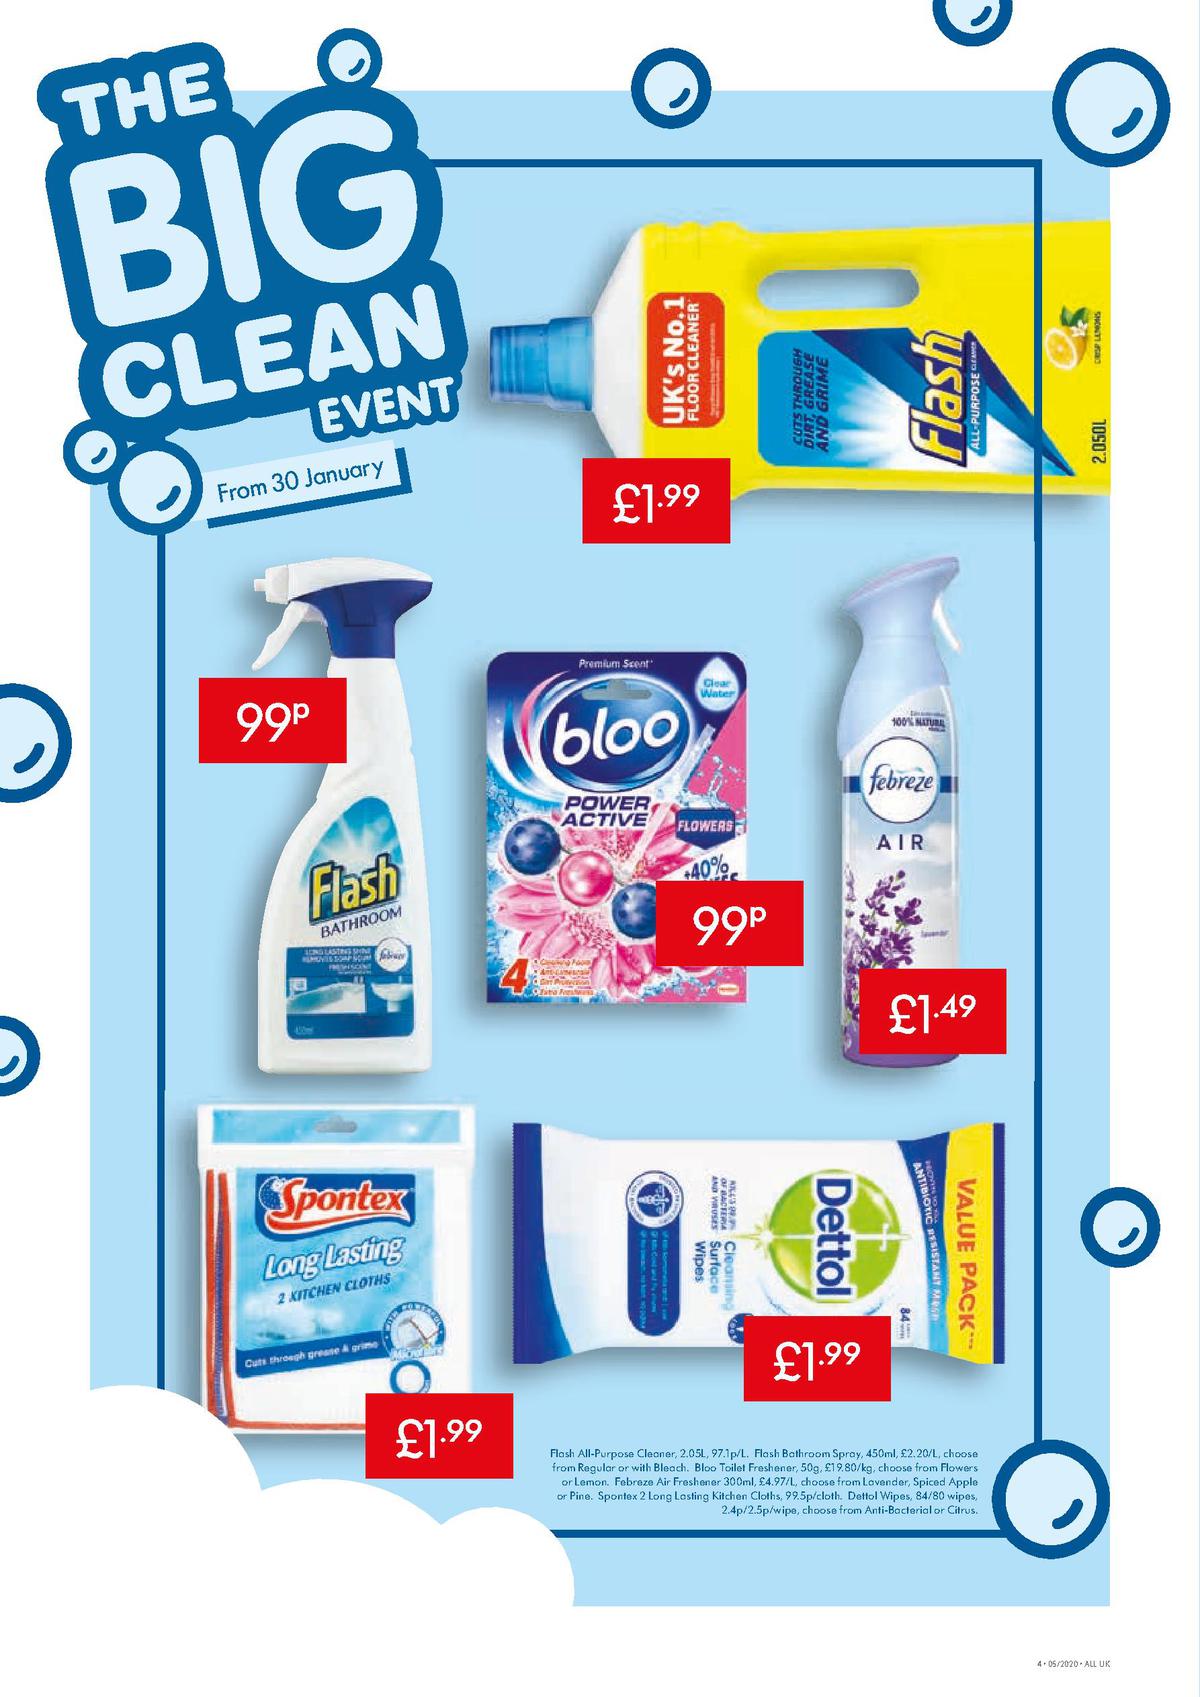 LIDL Offers from 30 January